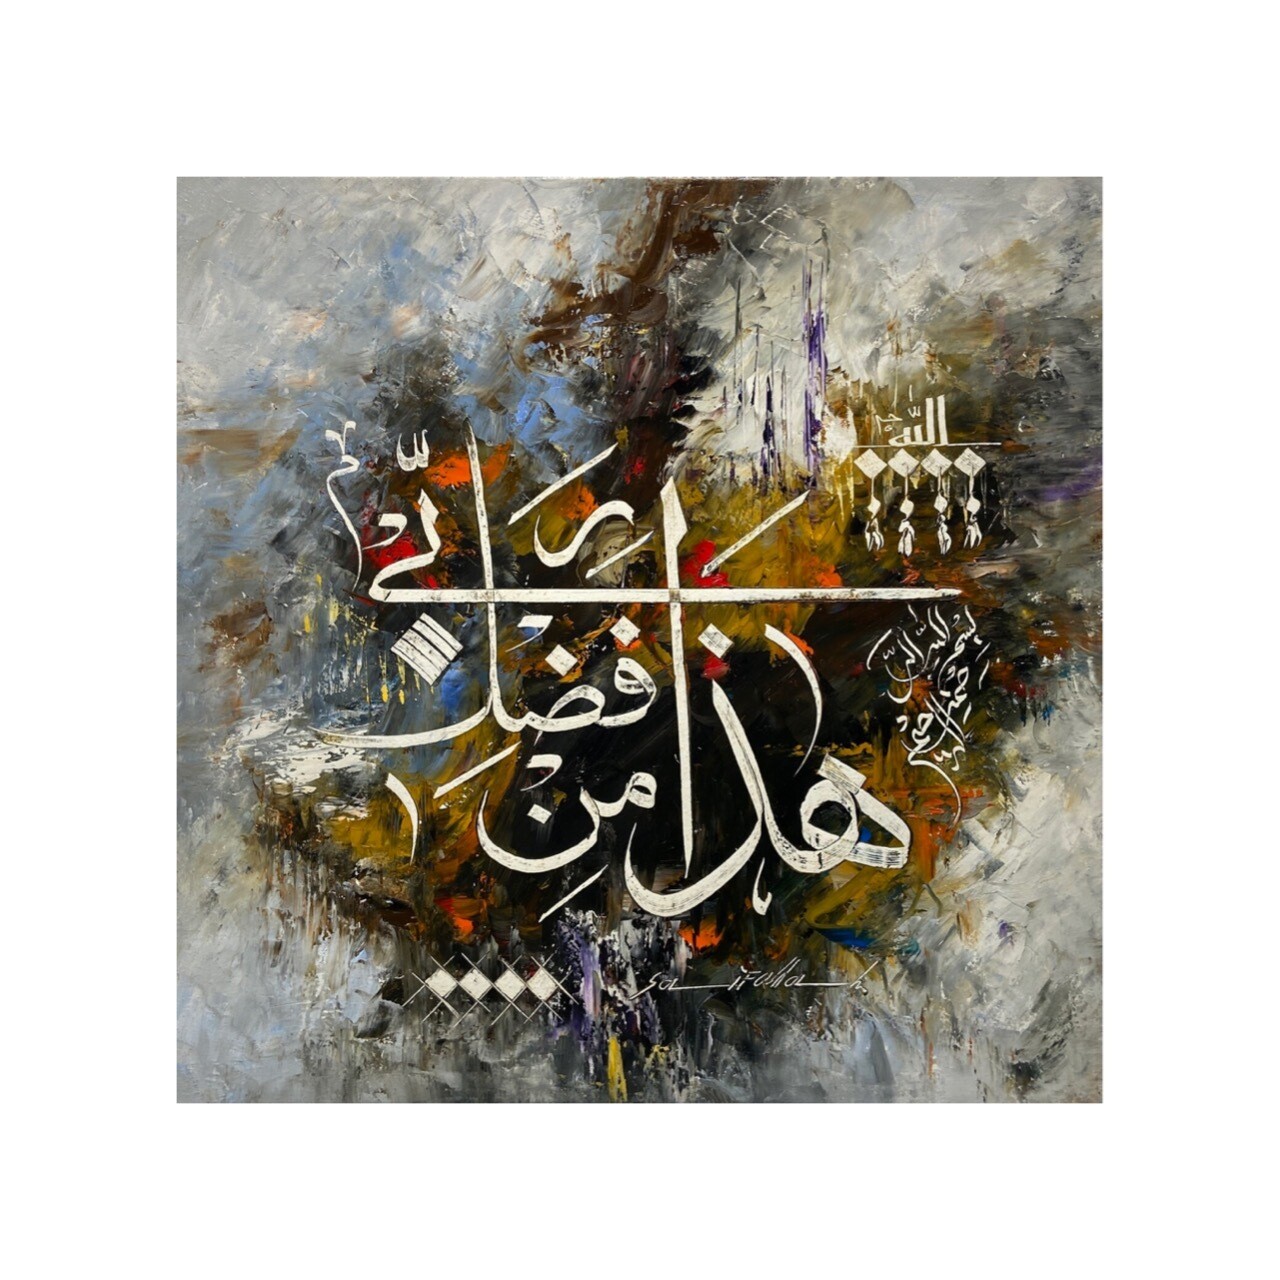 Quranic Ayat(40:27) - hand engraved knife painting